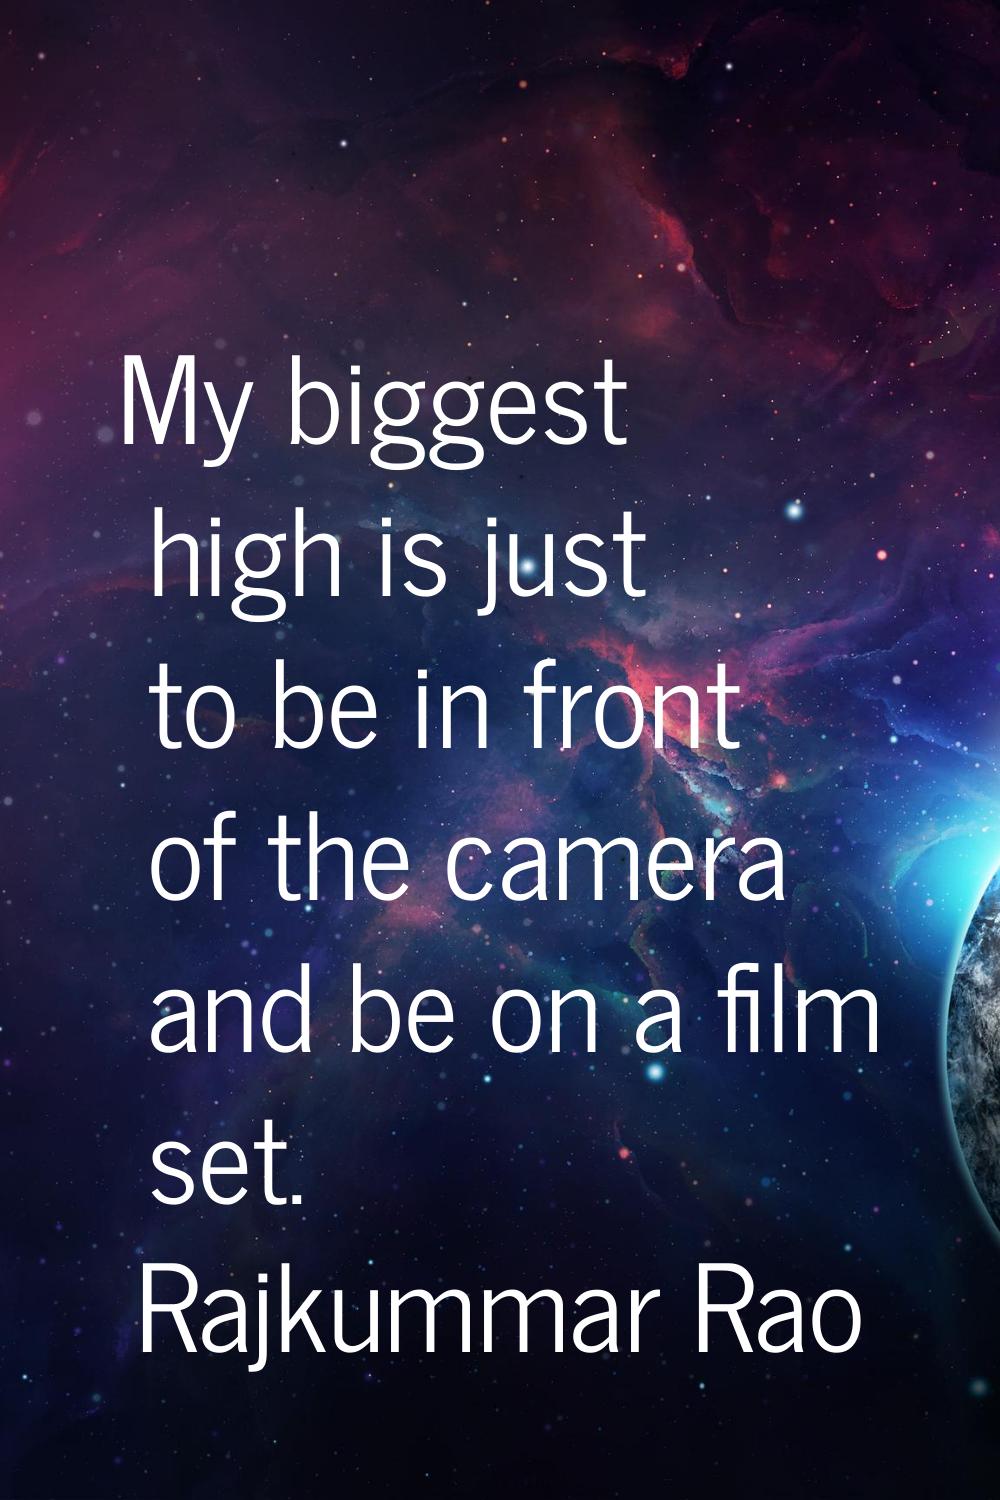 My biggest high is just to be in front of the camera and be on a film set.